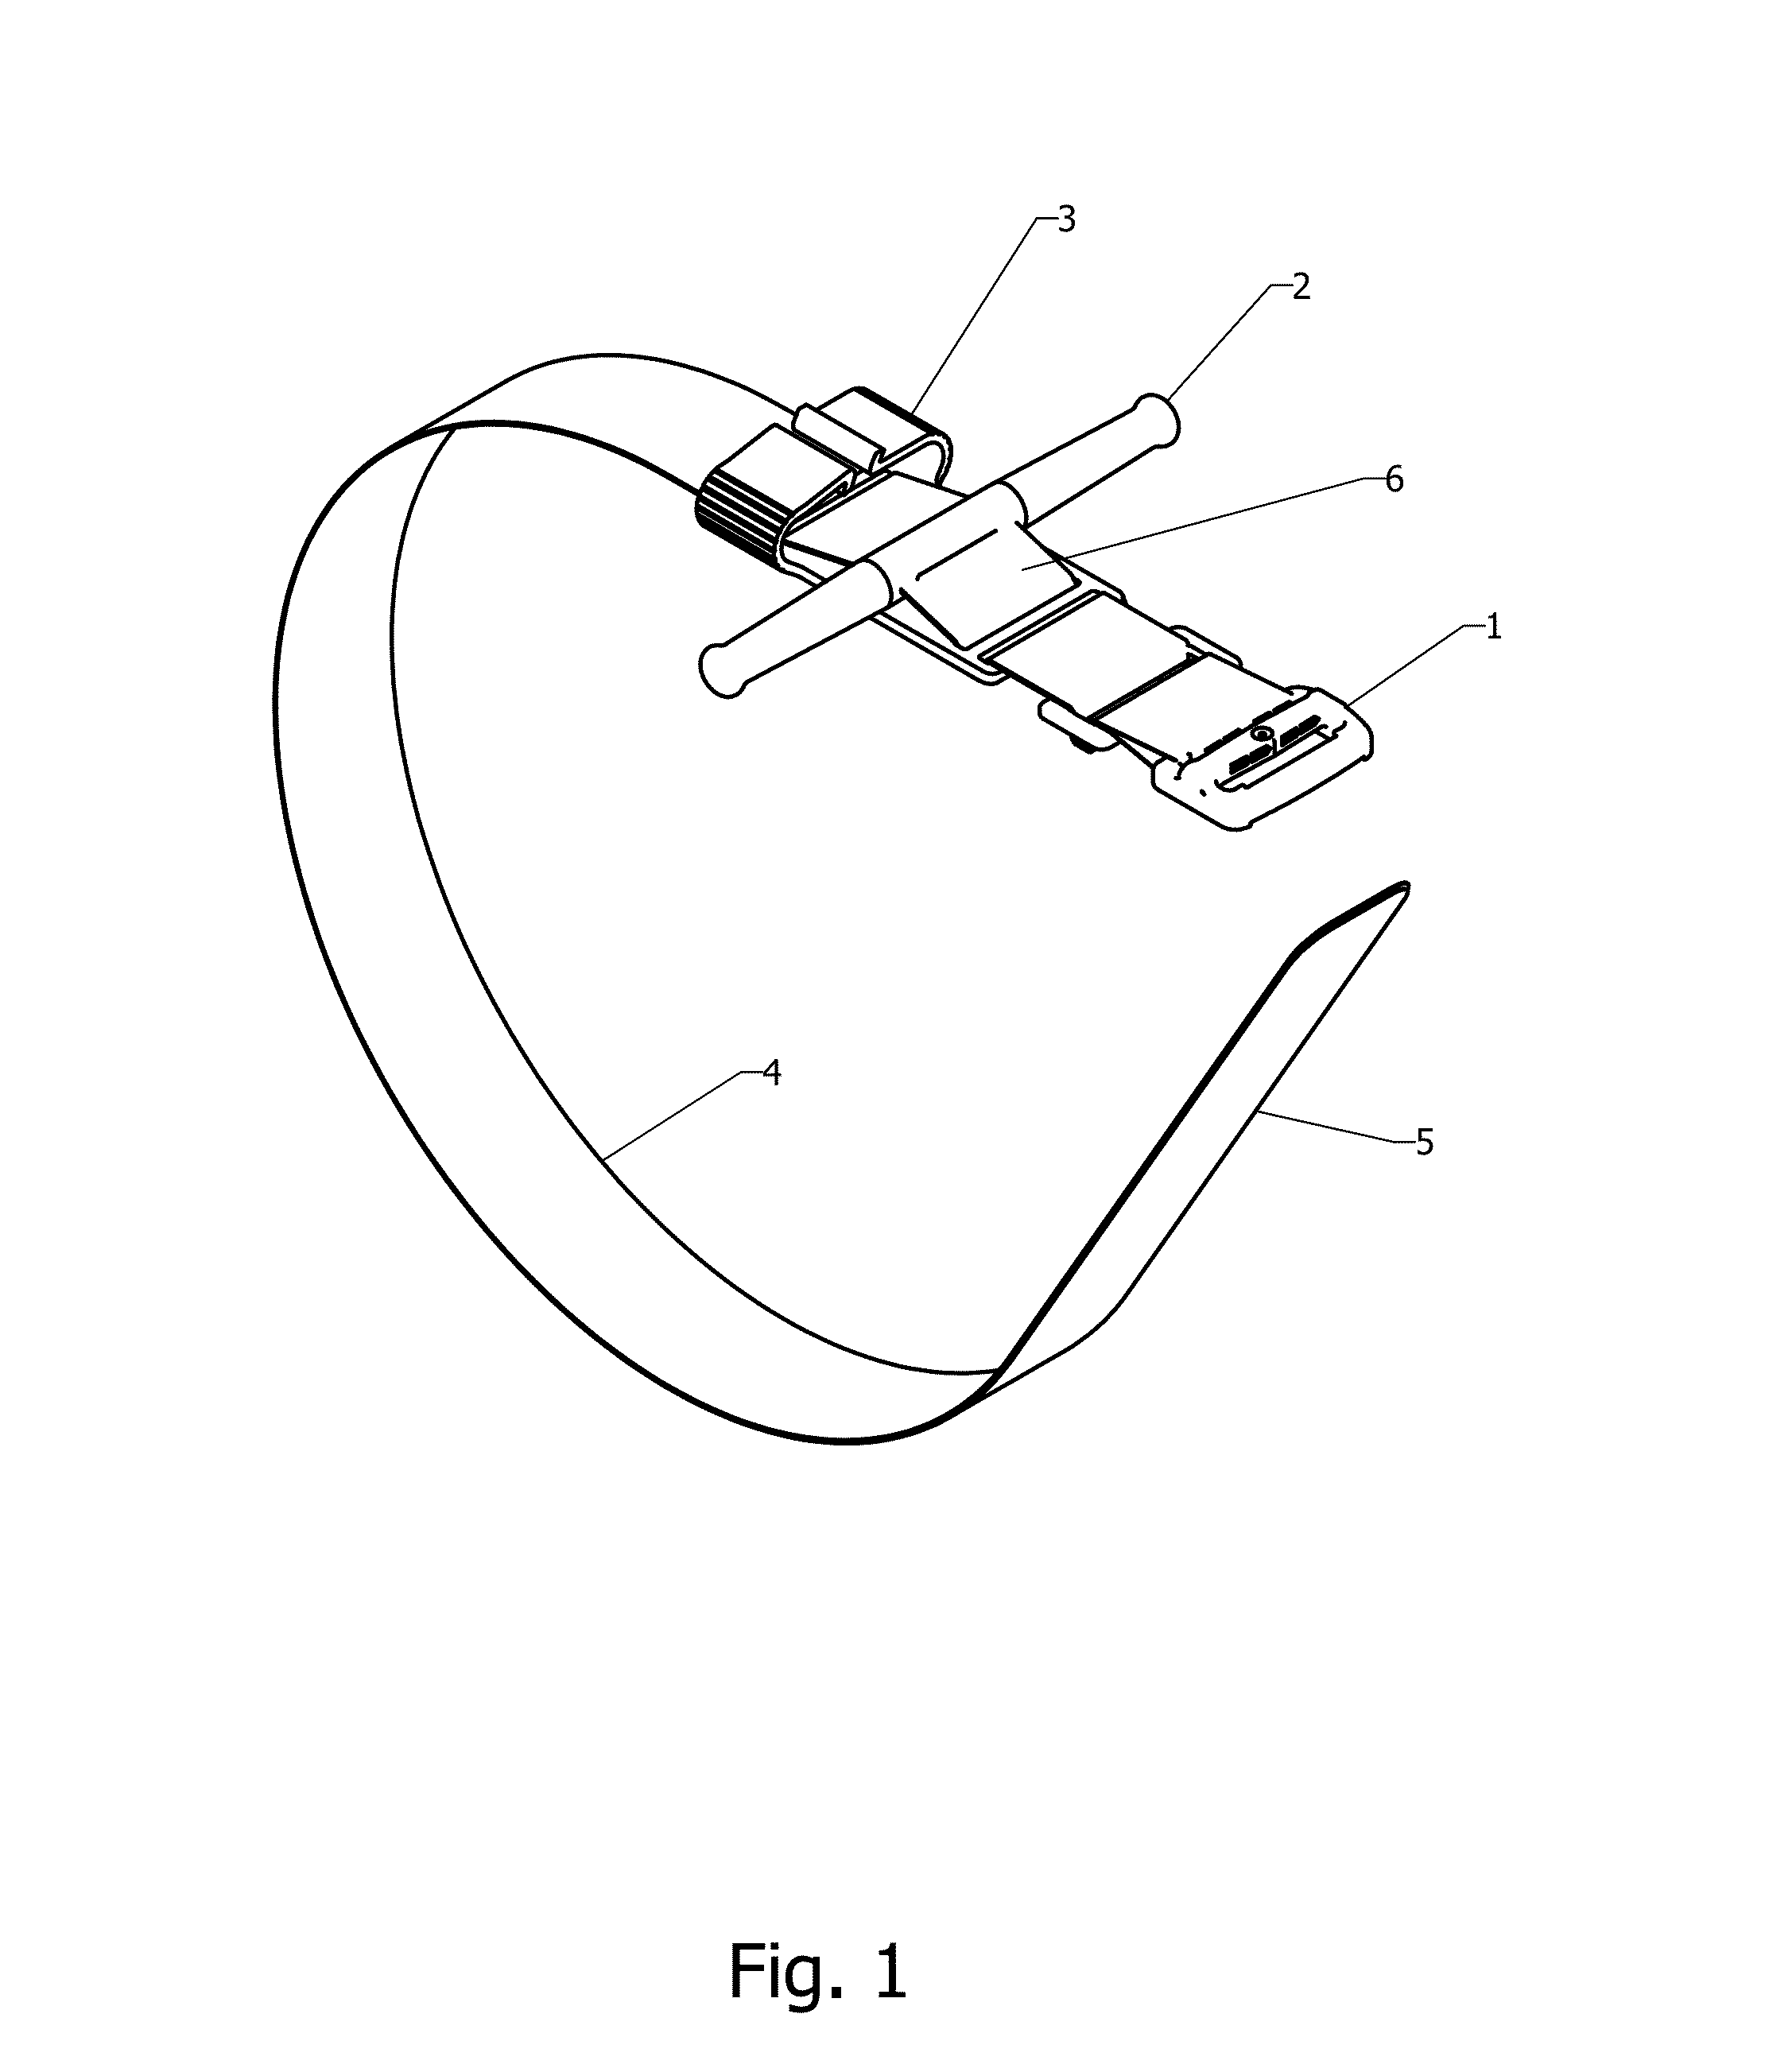 Self-locking tourniquet and automated timer